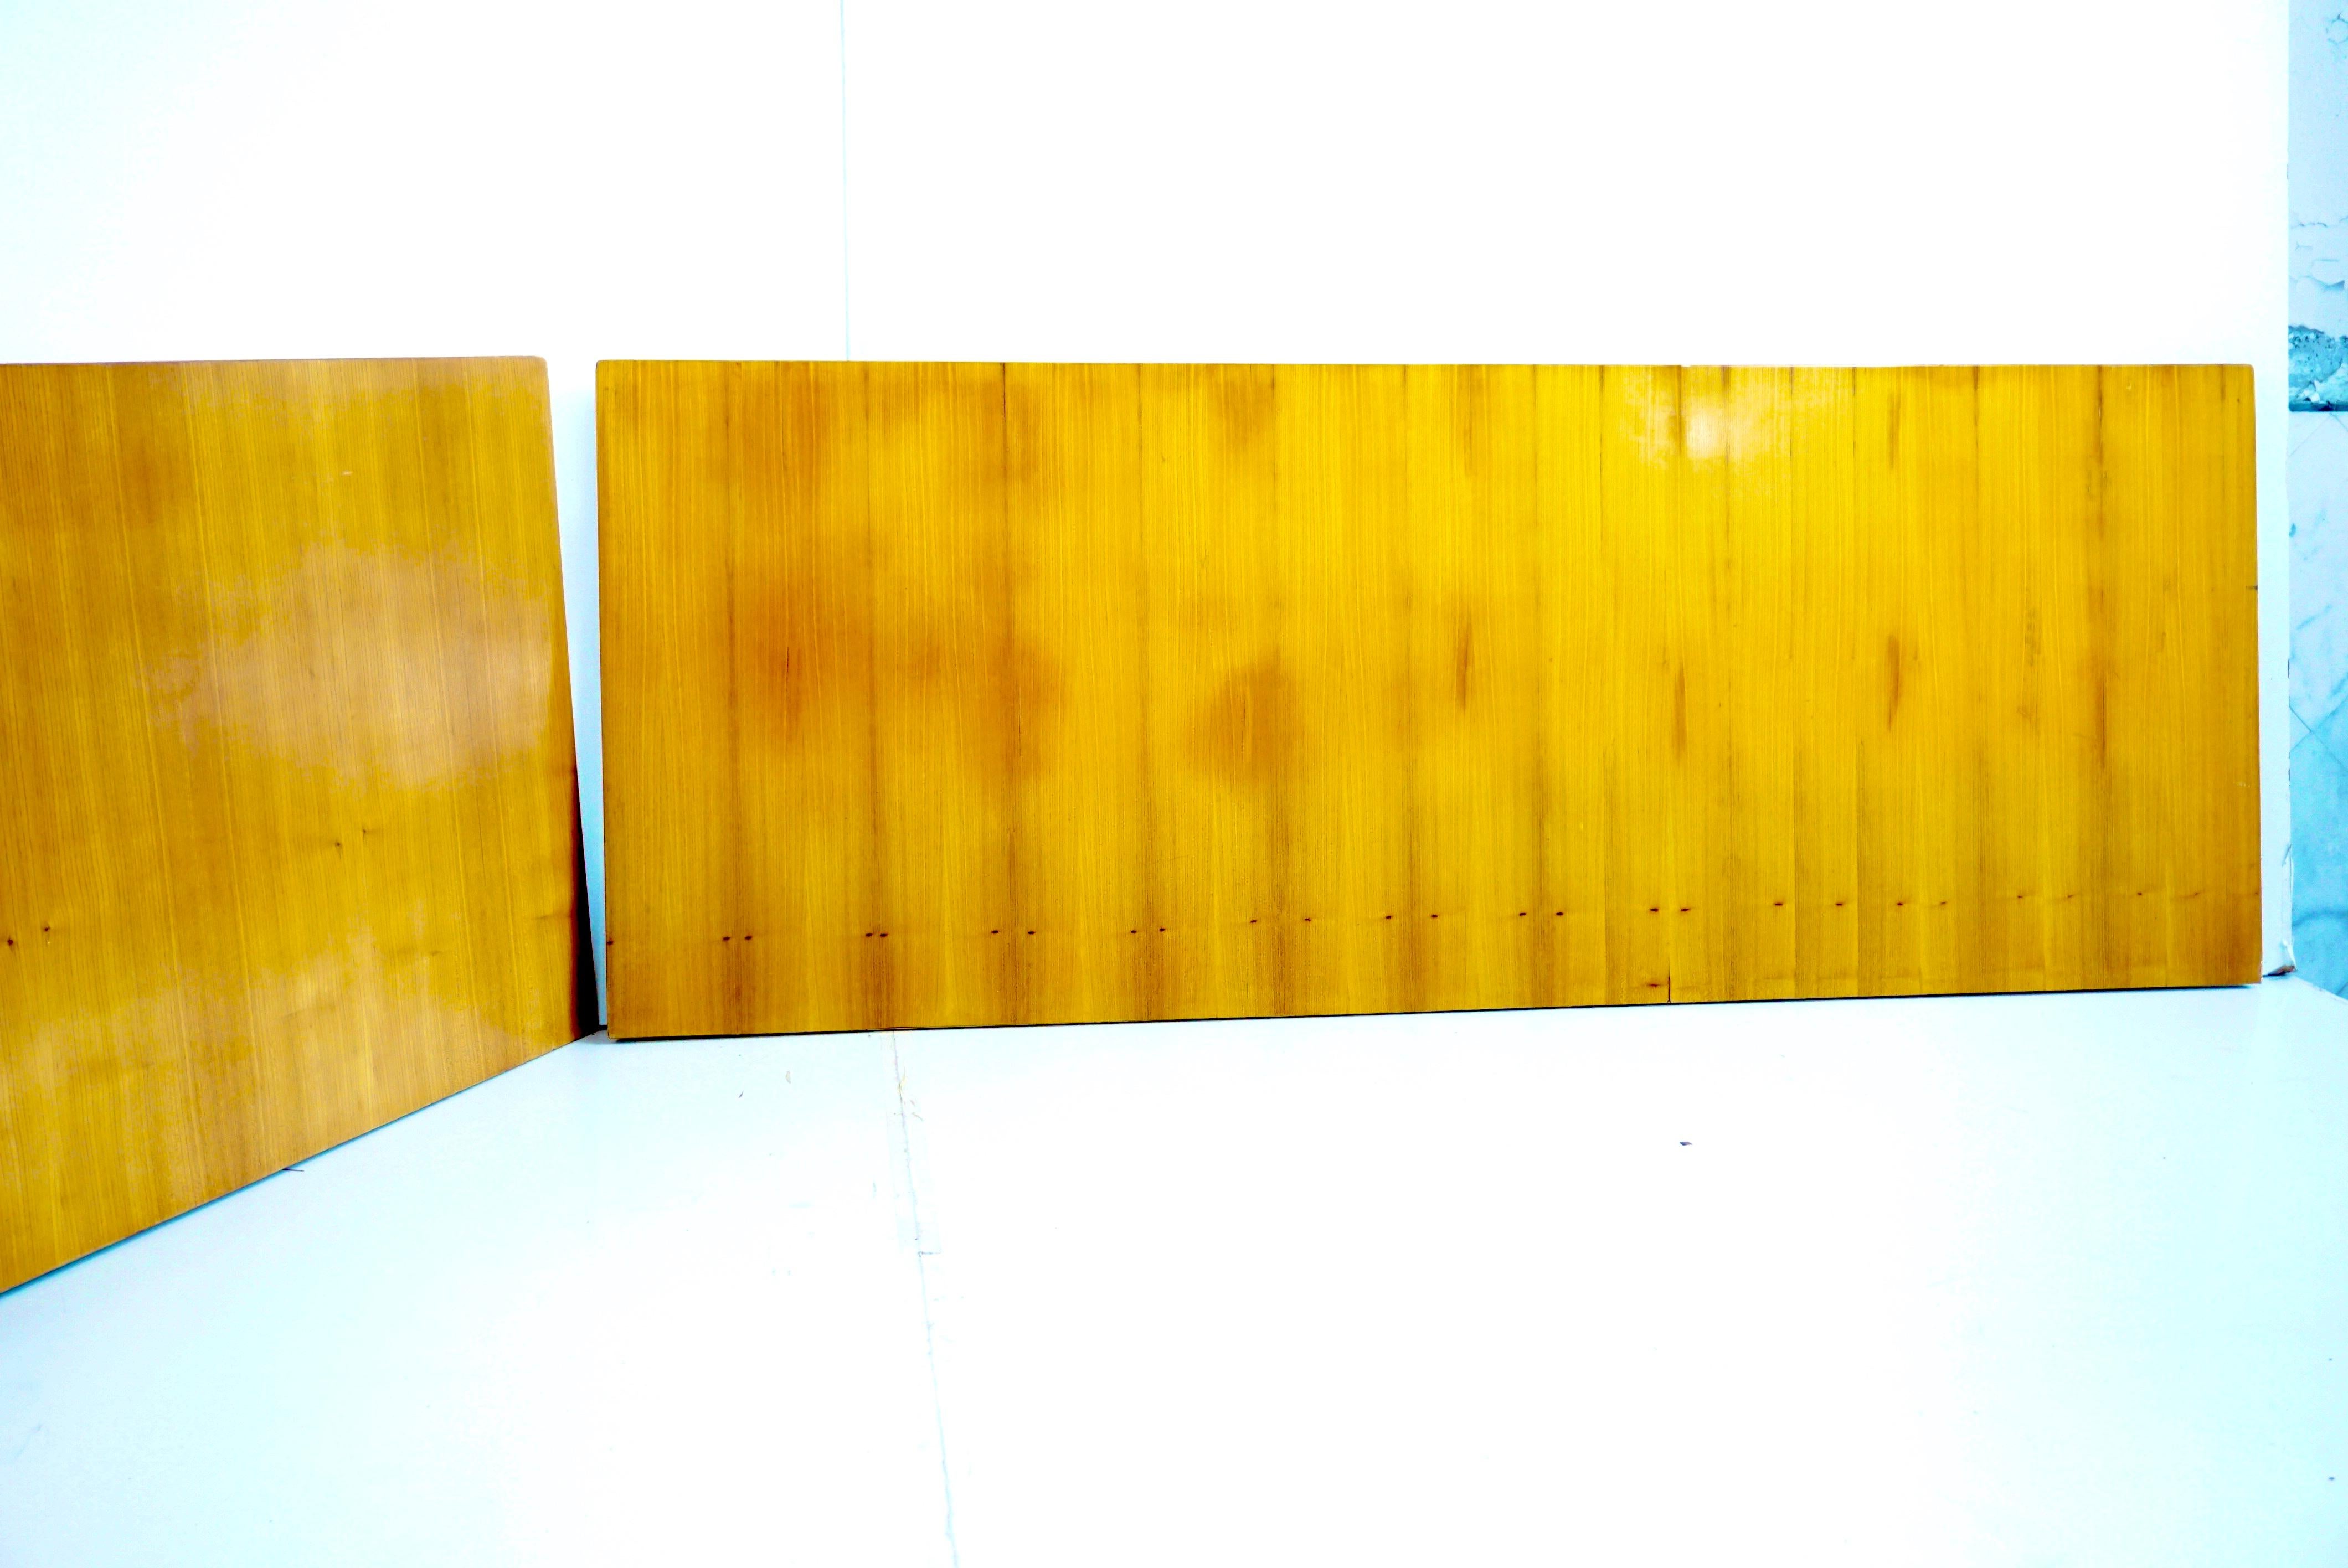 Pair of Large Gio Ponti Cherrywood Boiserie Panels from Hotel Royal, Naples 1955 For Sale 1